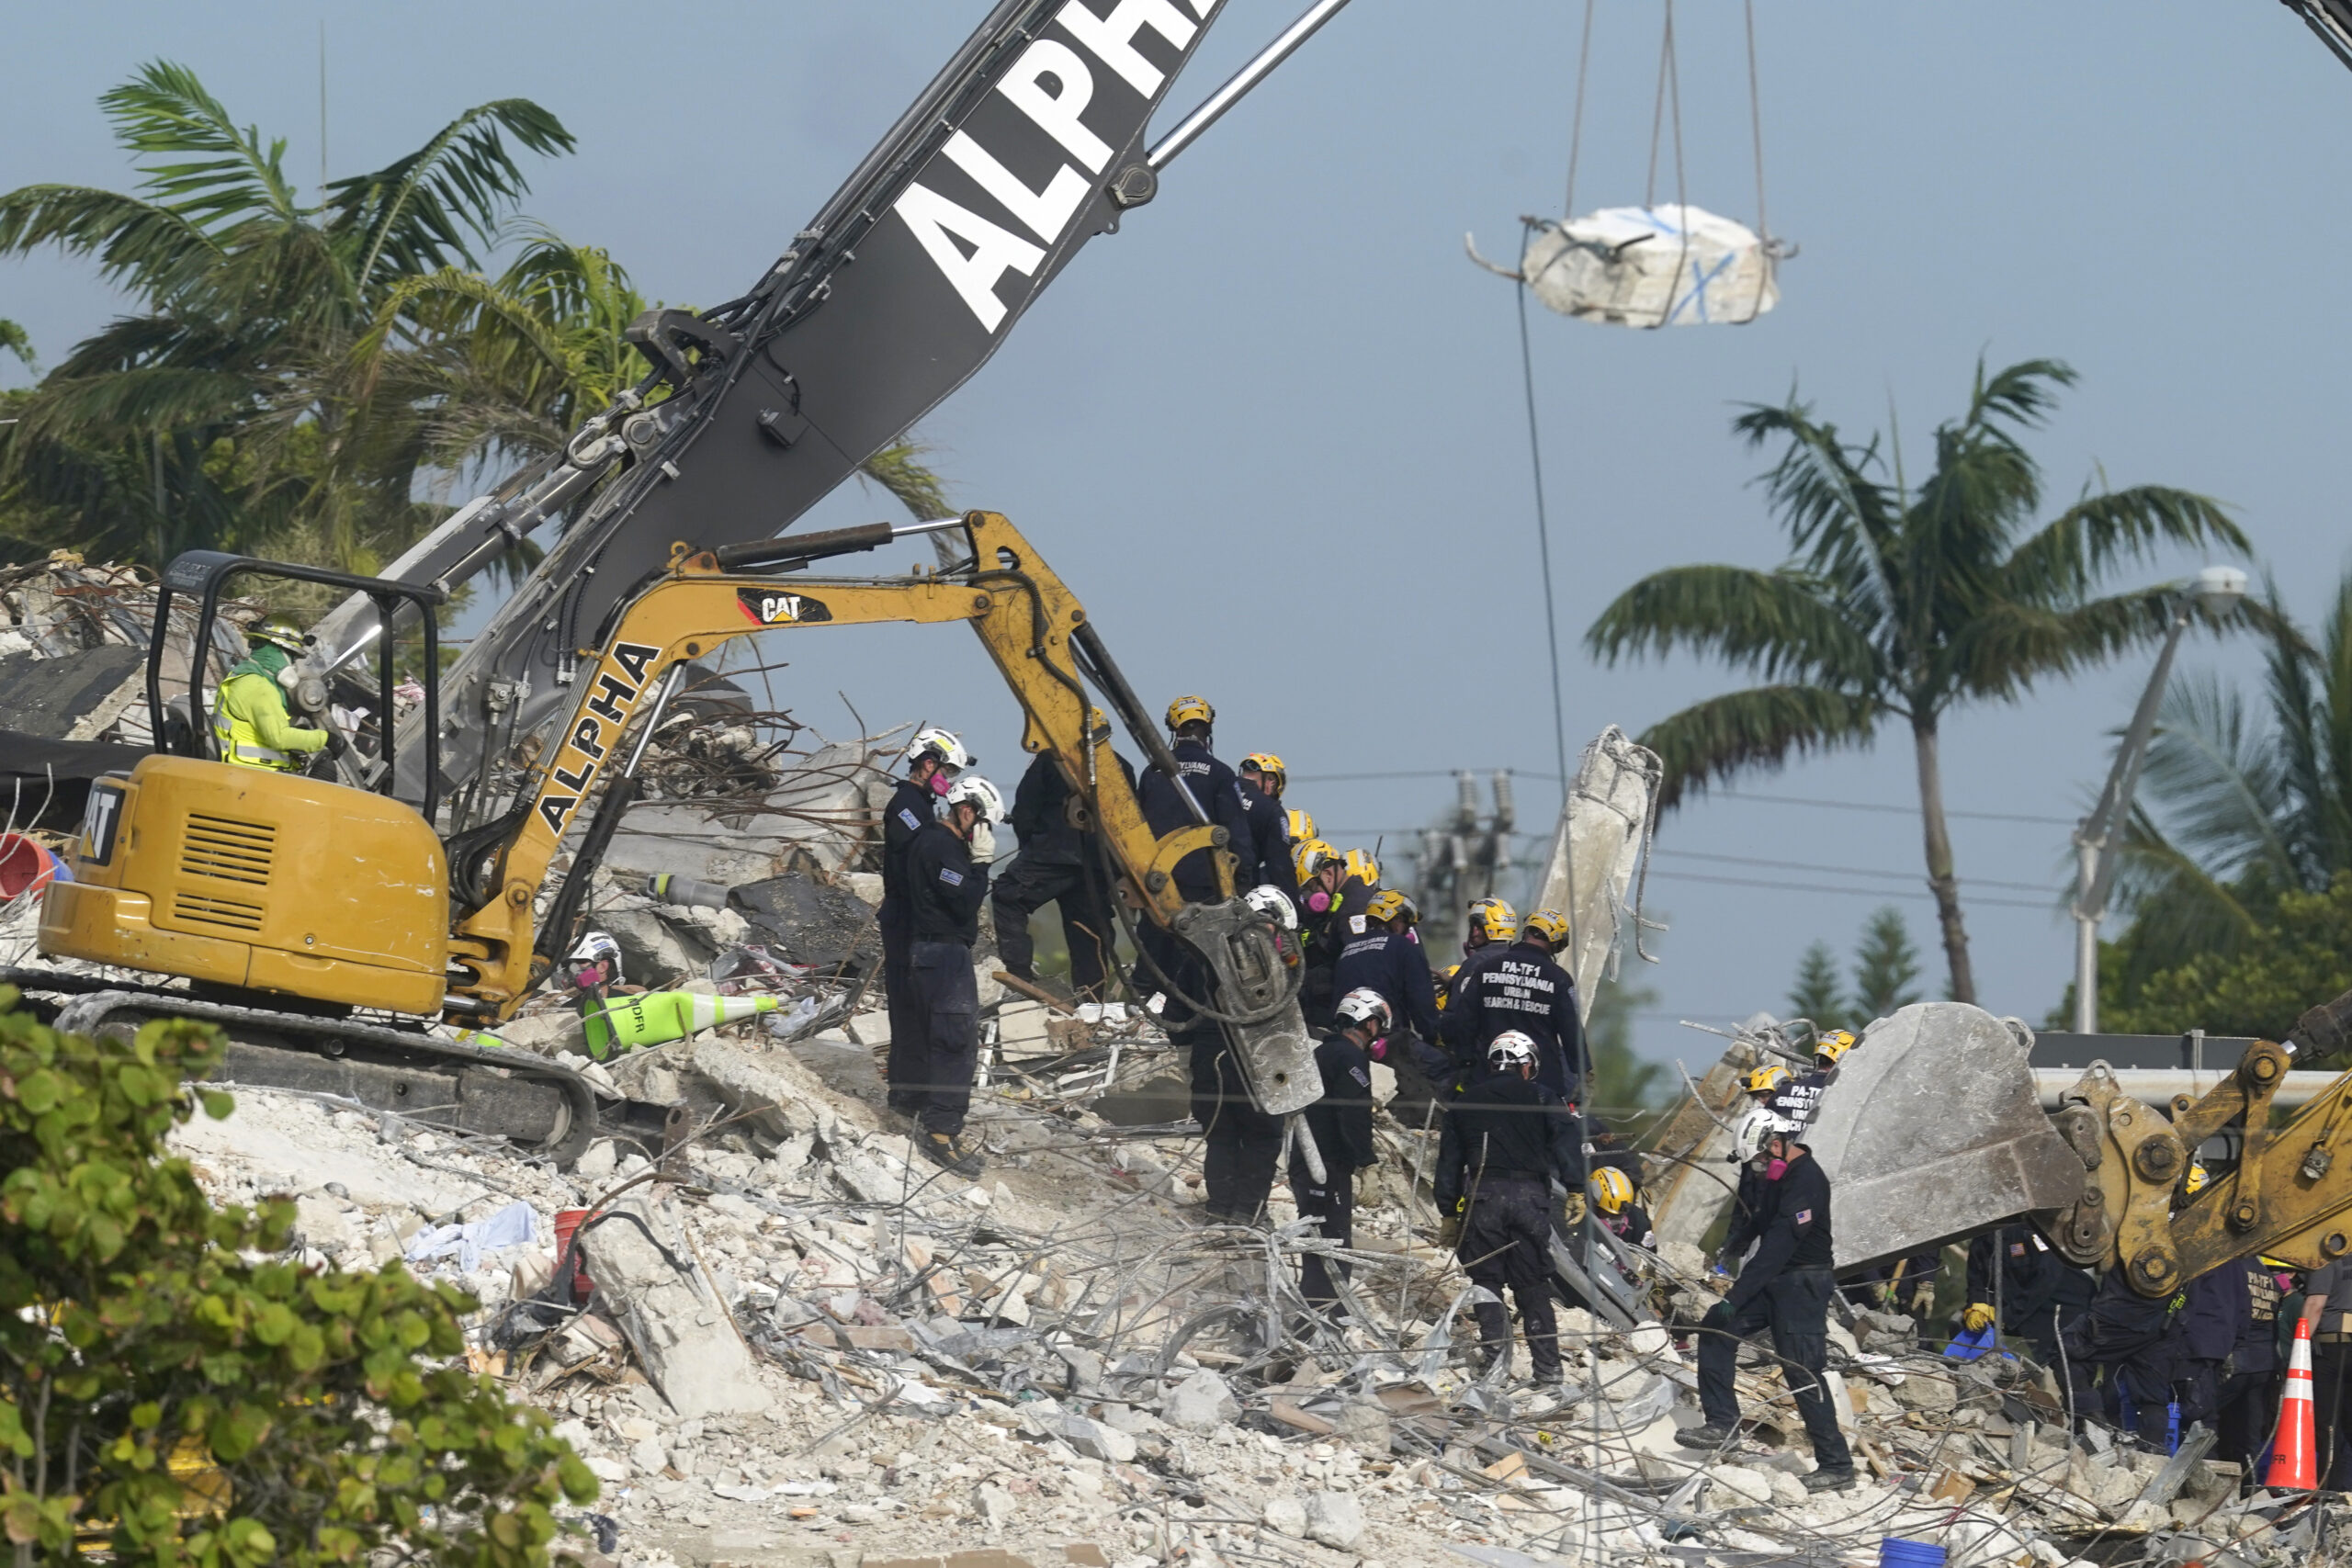 FILE - Rescue crews work at the site of the collapsed Champlain Towers South condo building after the remaining structure was demolished Sunday, in Surfside, Fla., Monday, July 5, 2021. Attorneys for the families who lost relatives or homes in last year’s collapse of a Florida condominium tower that killed 98 people finalized a $1 billion settlement on Friday, May 27, 2022. (AP Photo/Lynne Sladky, File)